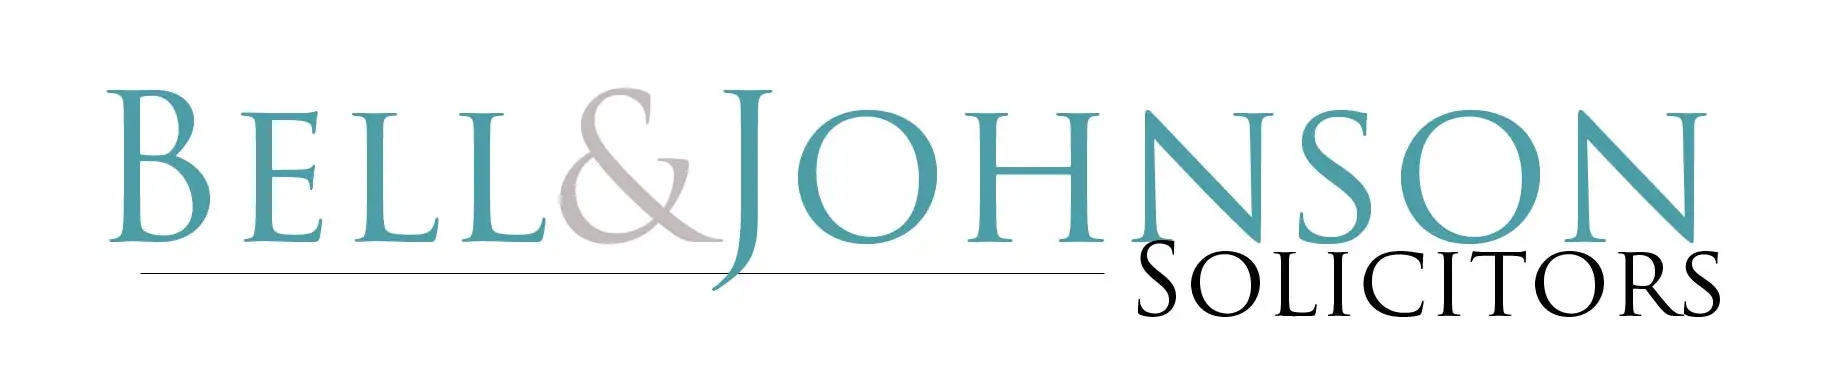 Company logo of Bell & Johnson Solicitors